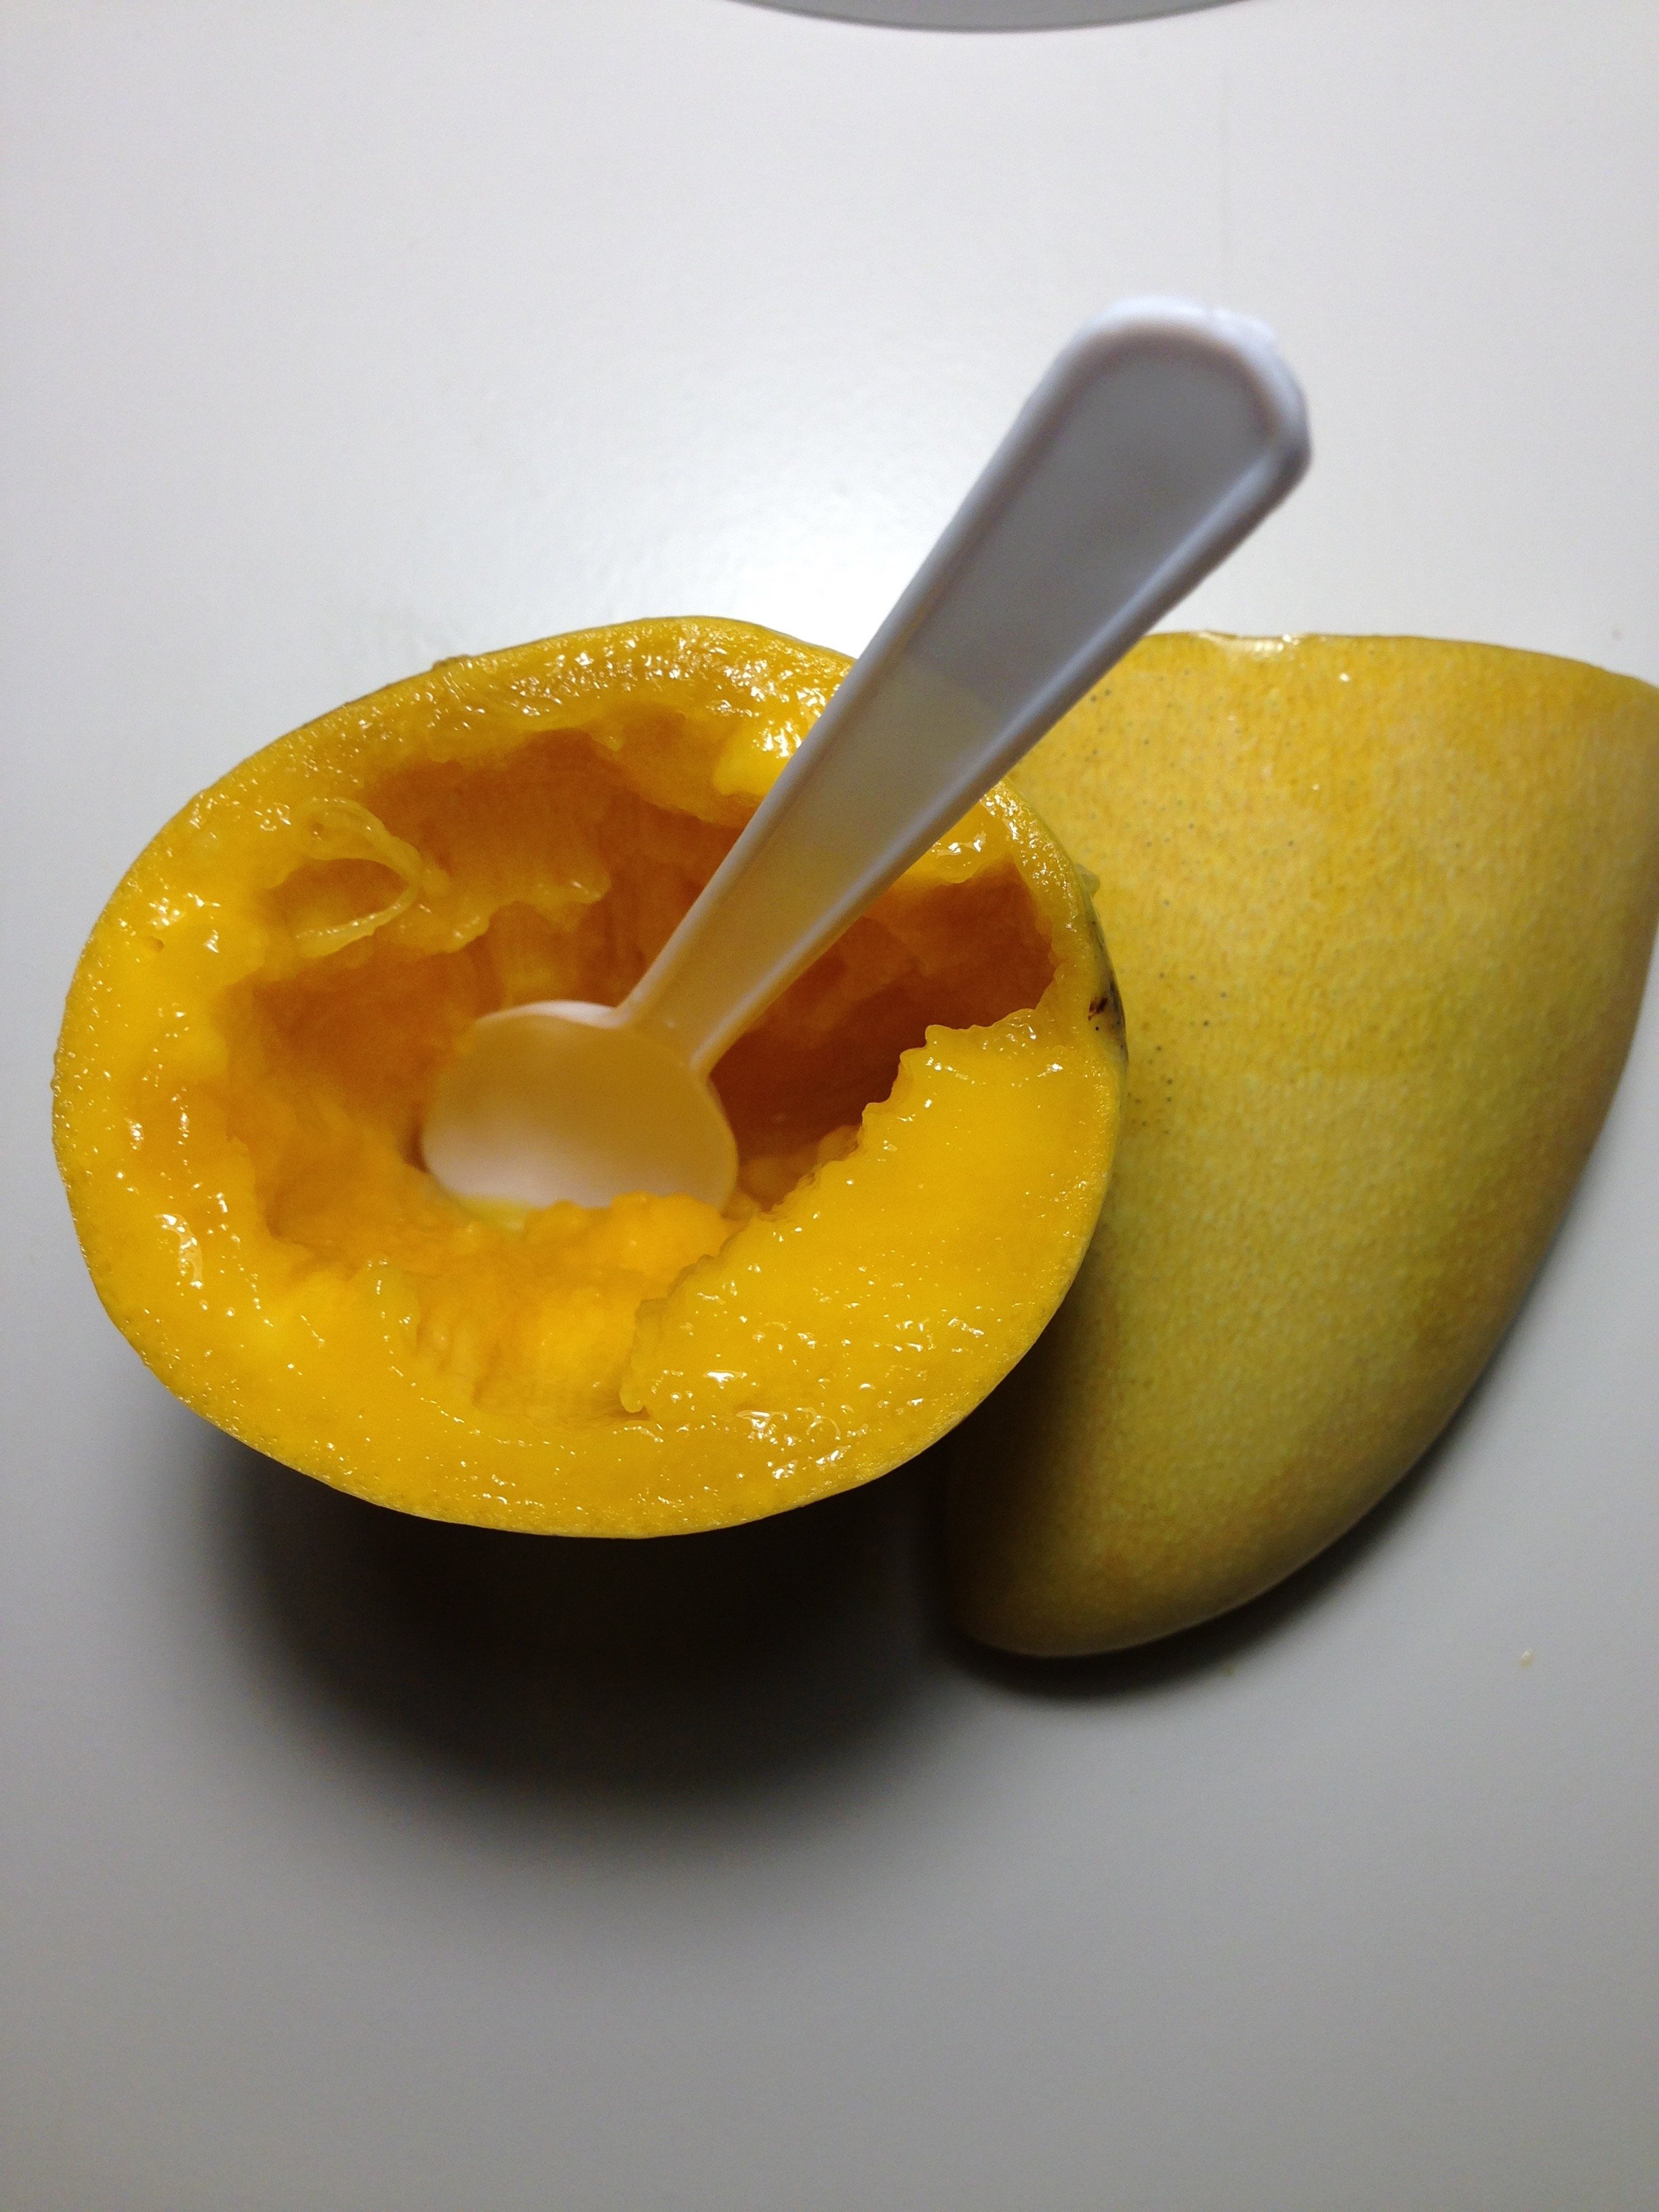 Left a mango out overnight, the half with a spoon became rotten much faster  than the other : r/mildlyinteresting